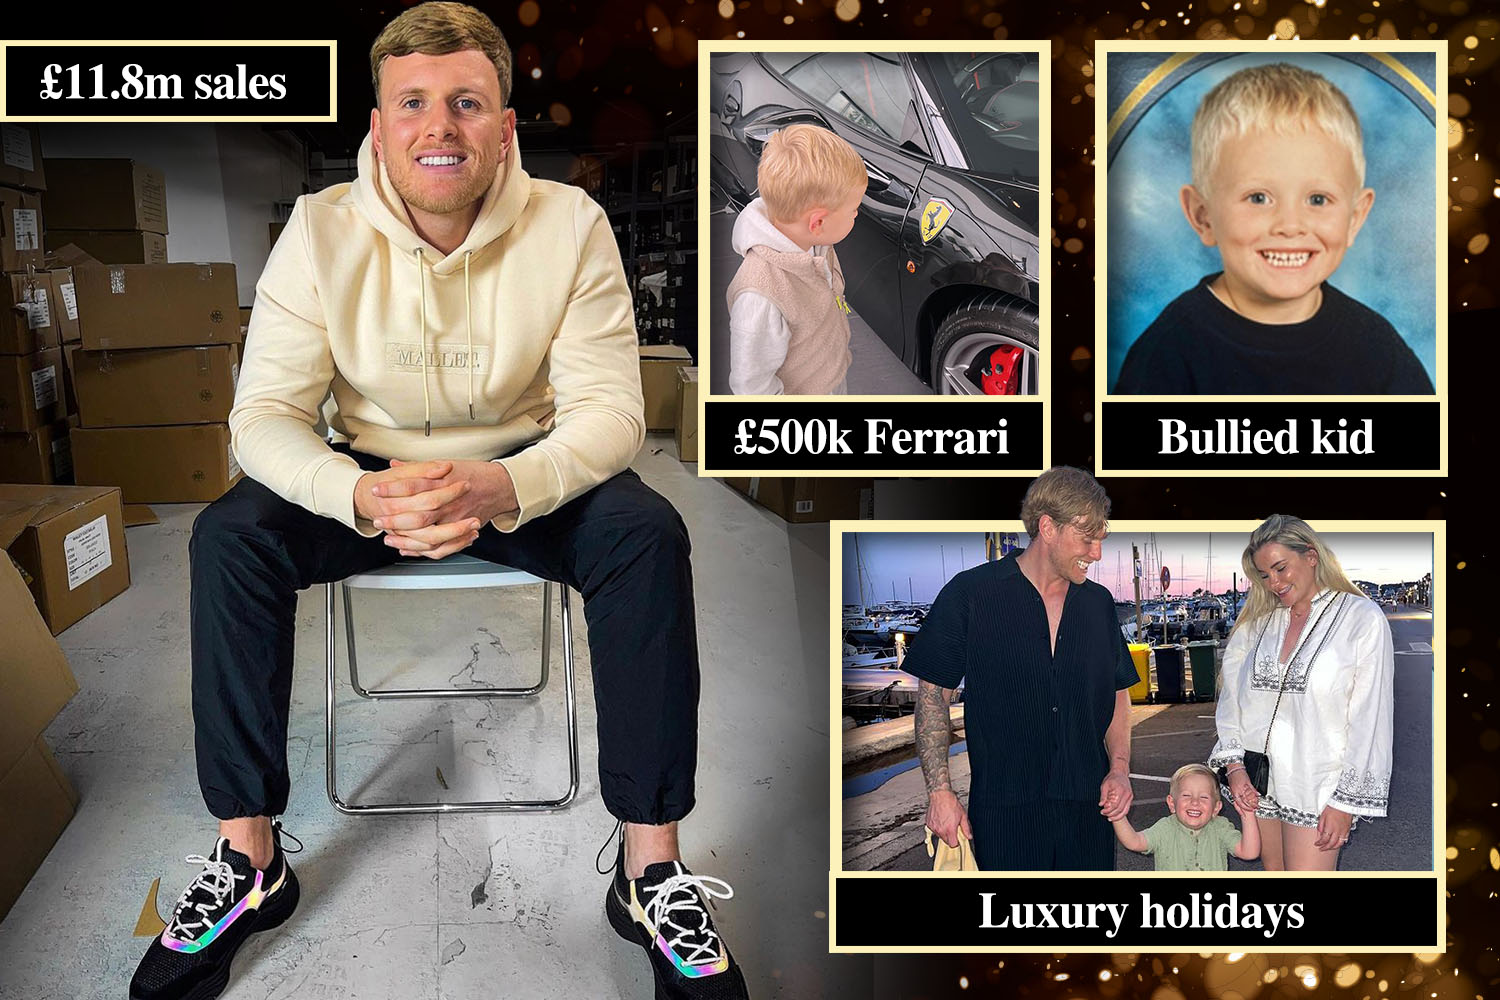 TOWIE's Tommy went from council estate to £6m fortune…but now has 'nothing'